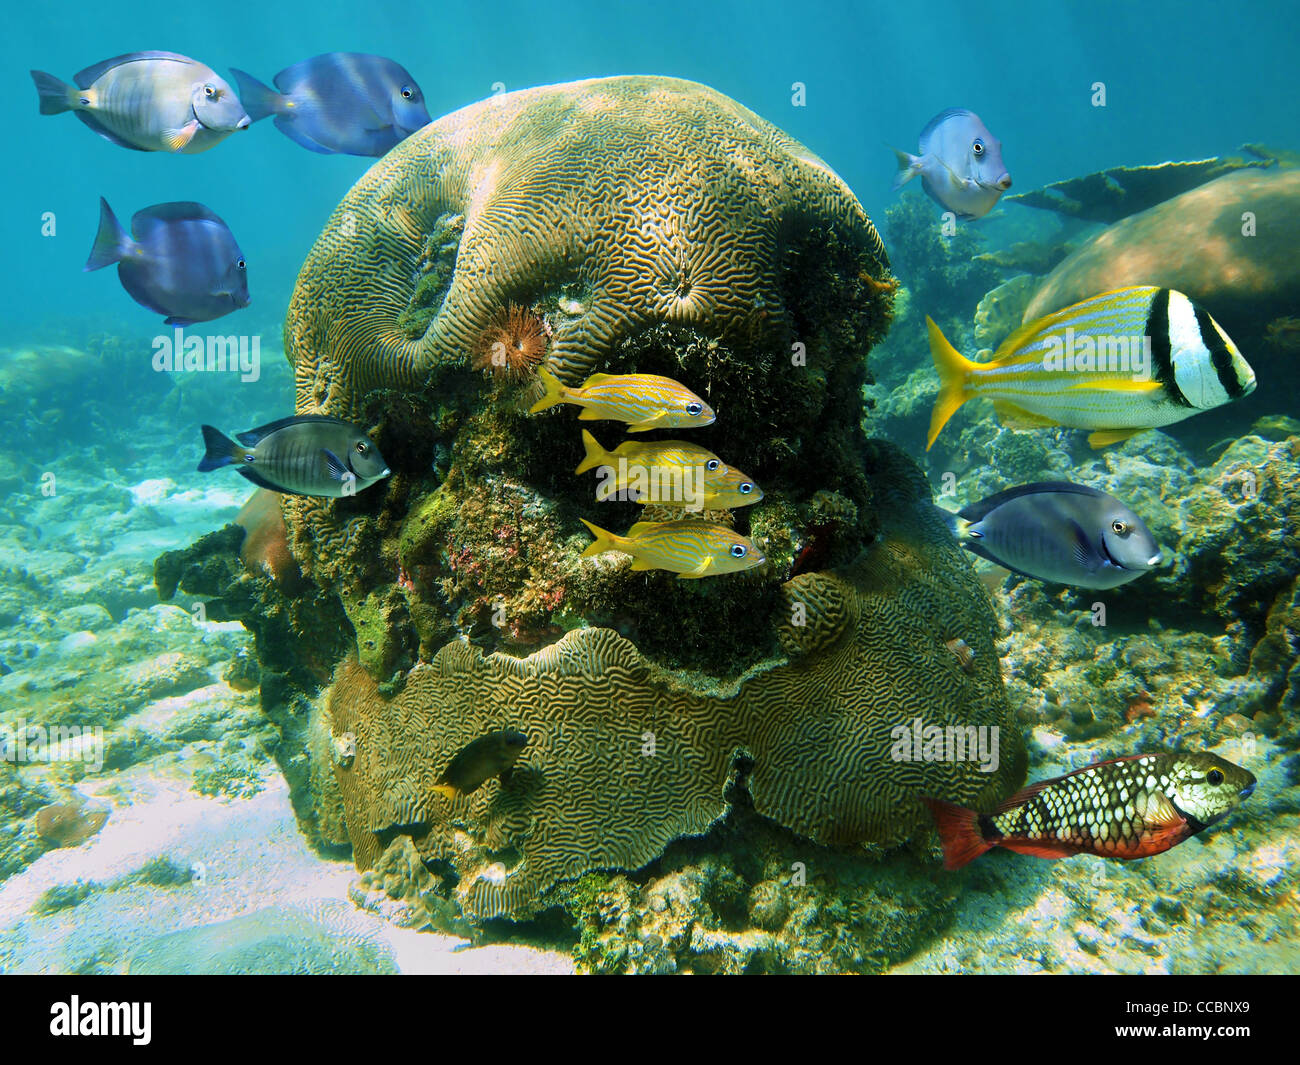 Tropical reef fish with brain coral underwater in the Caribbean sea, Mexico Stock Photo